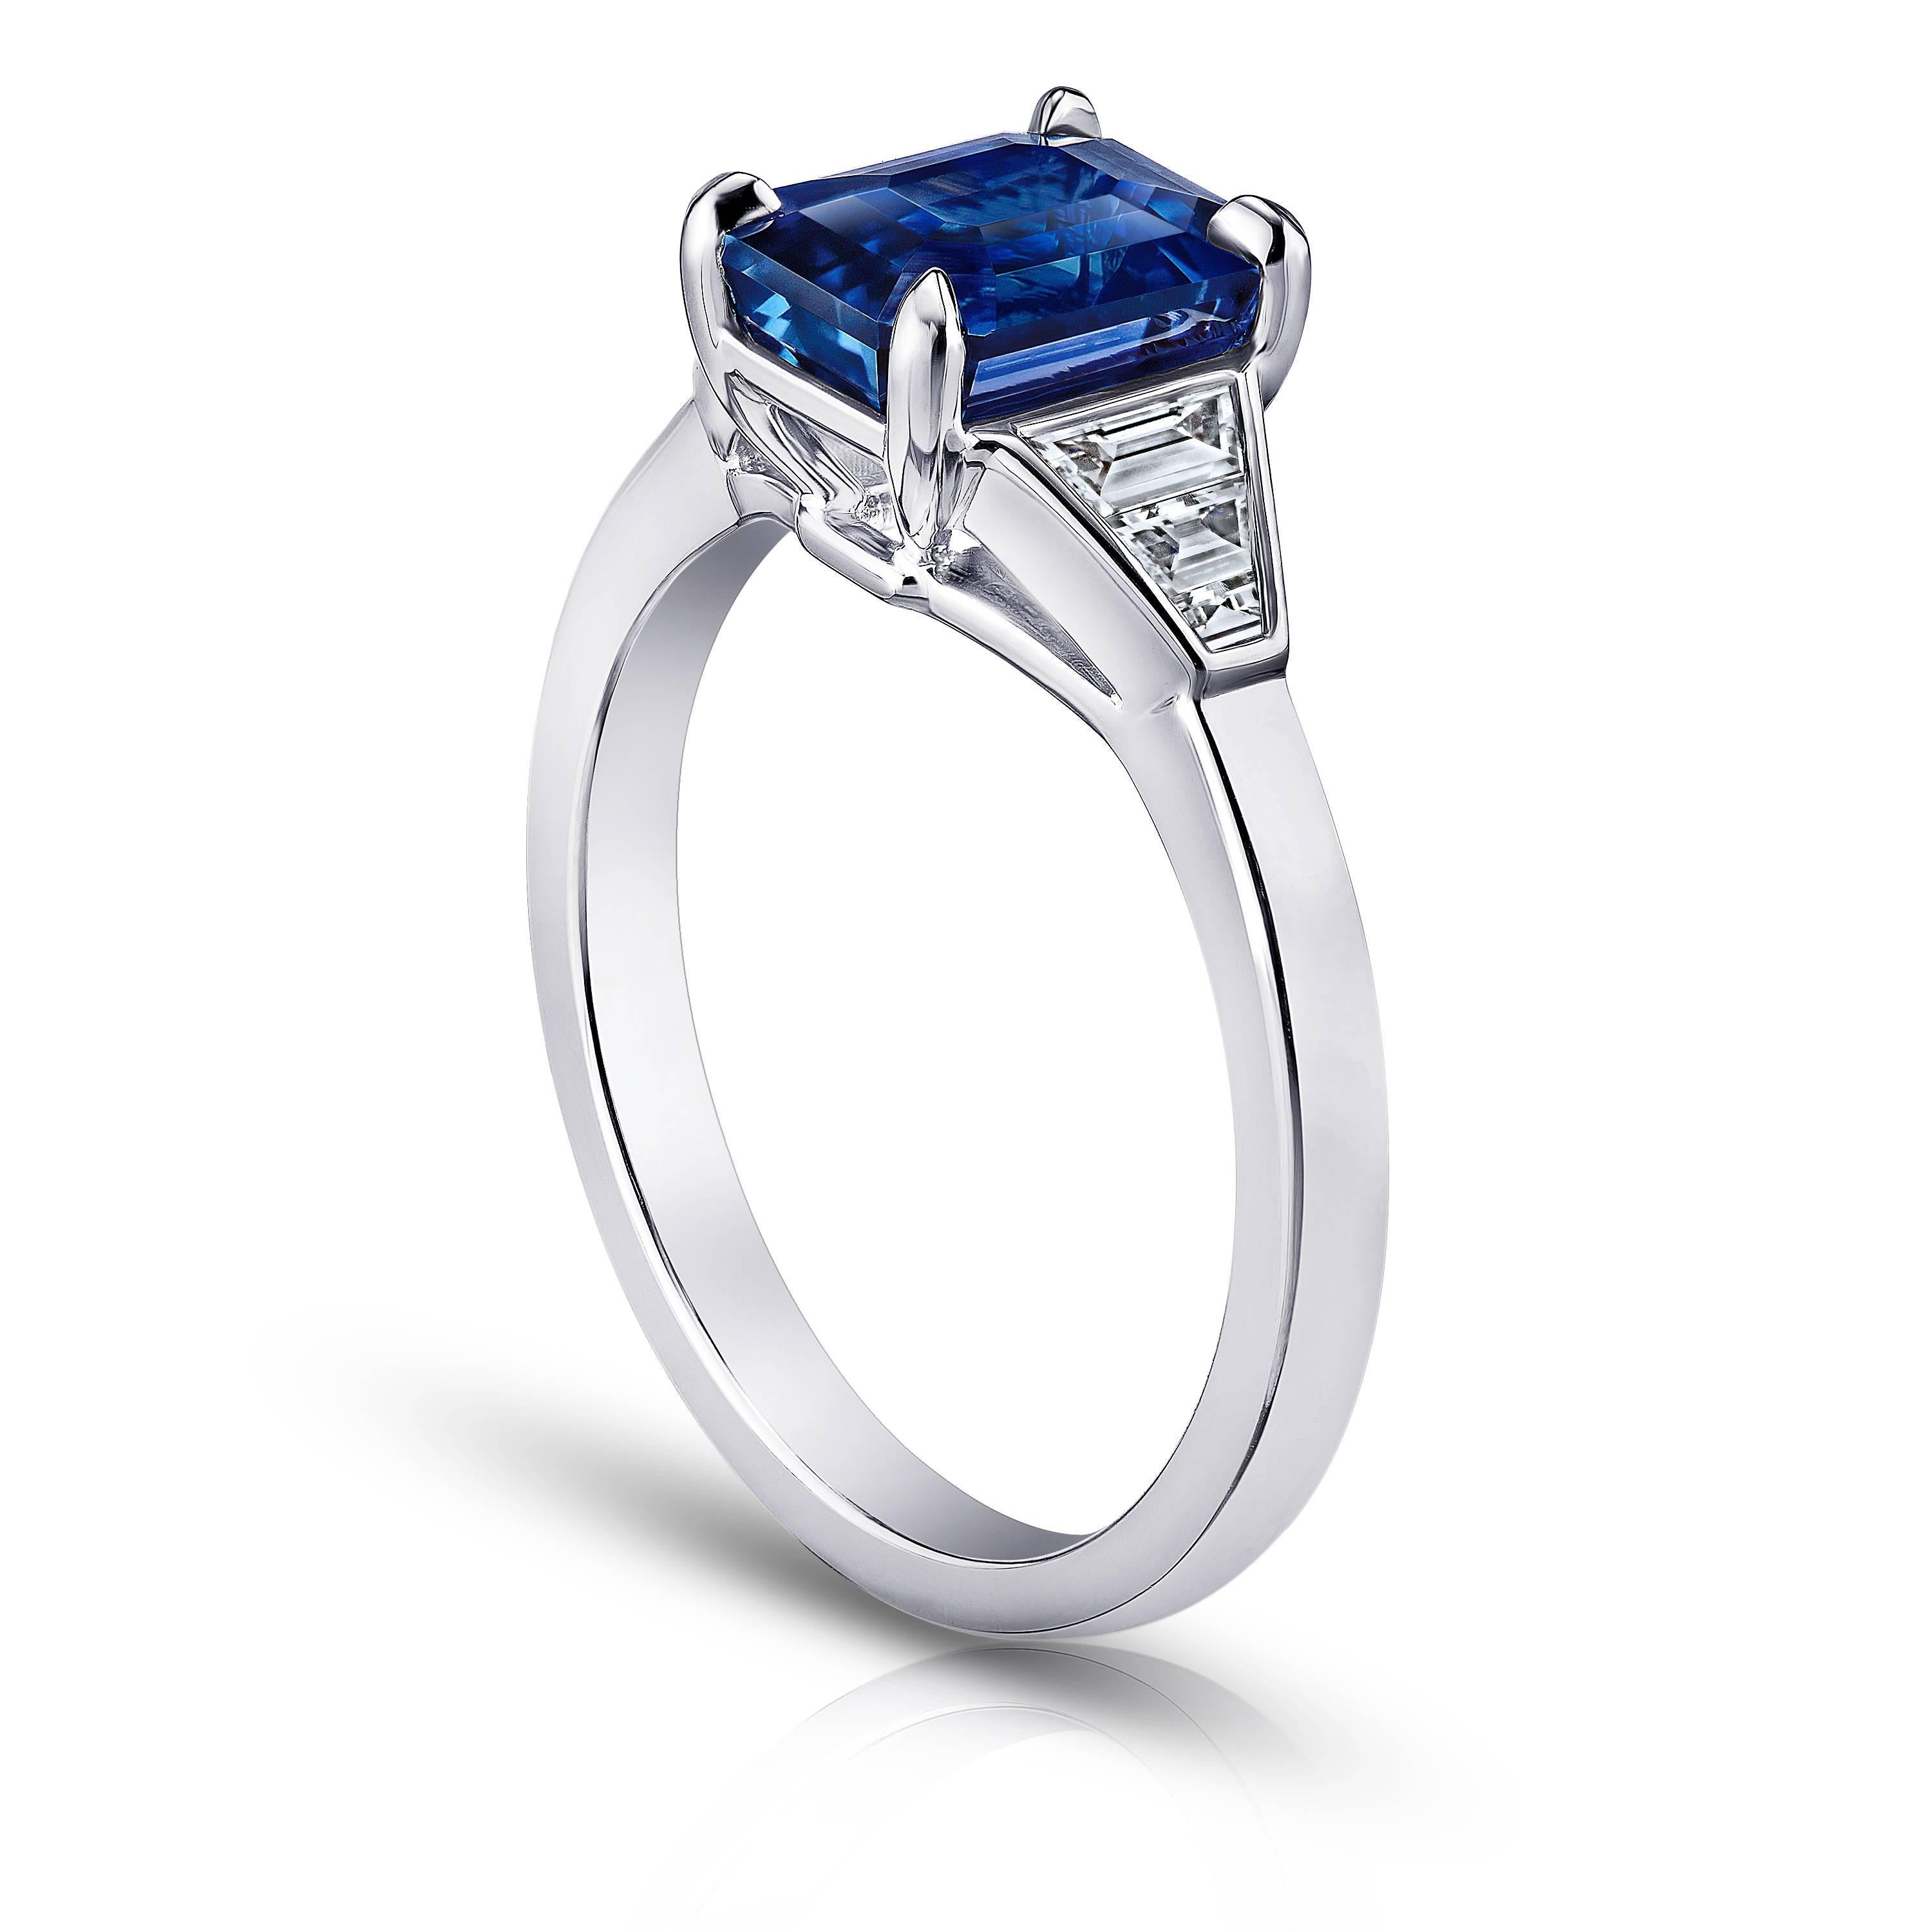 This blue sapphire ring is impeccable. Its center stone is a vivid blue emerald cut sapphire weighing 3.01 carats. The stone is perfectly cut and extremely clean with great  color saturation. Sided with six graduated baguette cut diamonds weighing